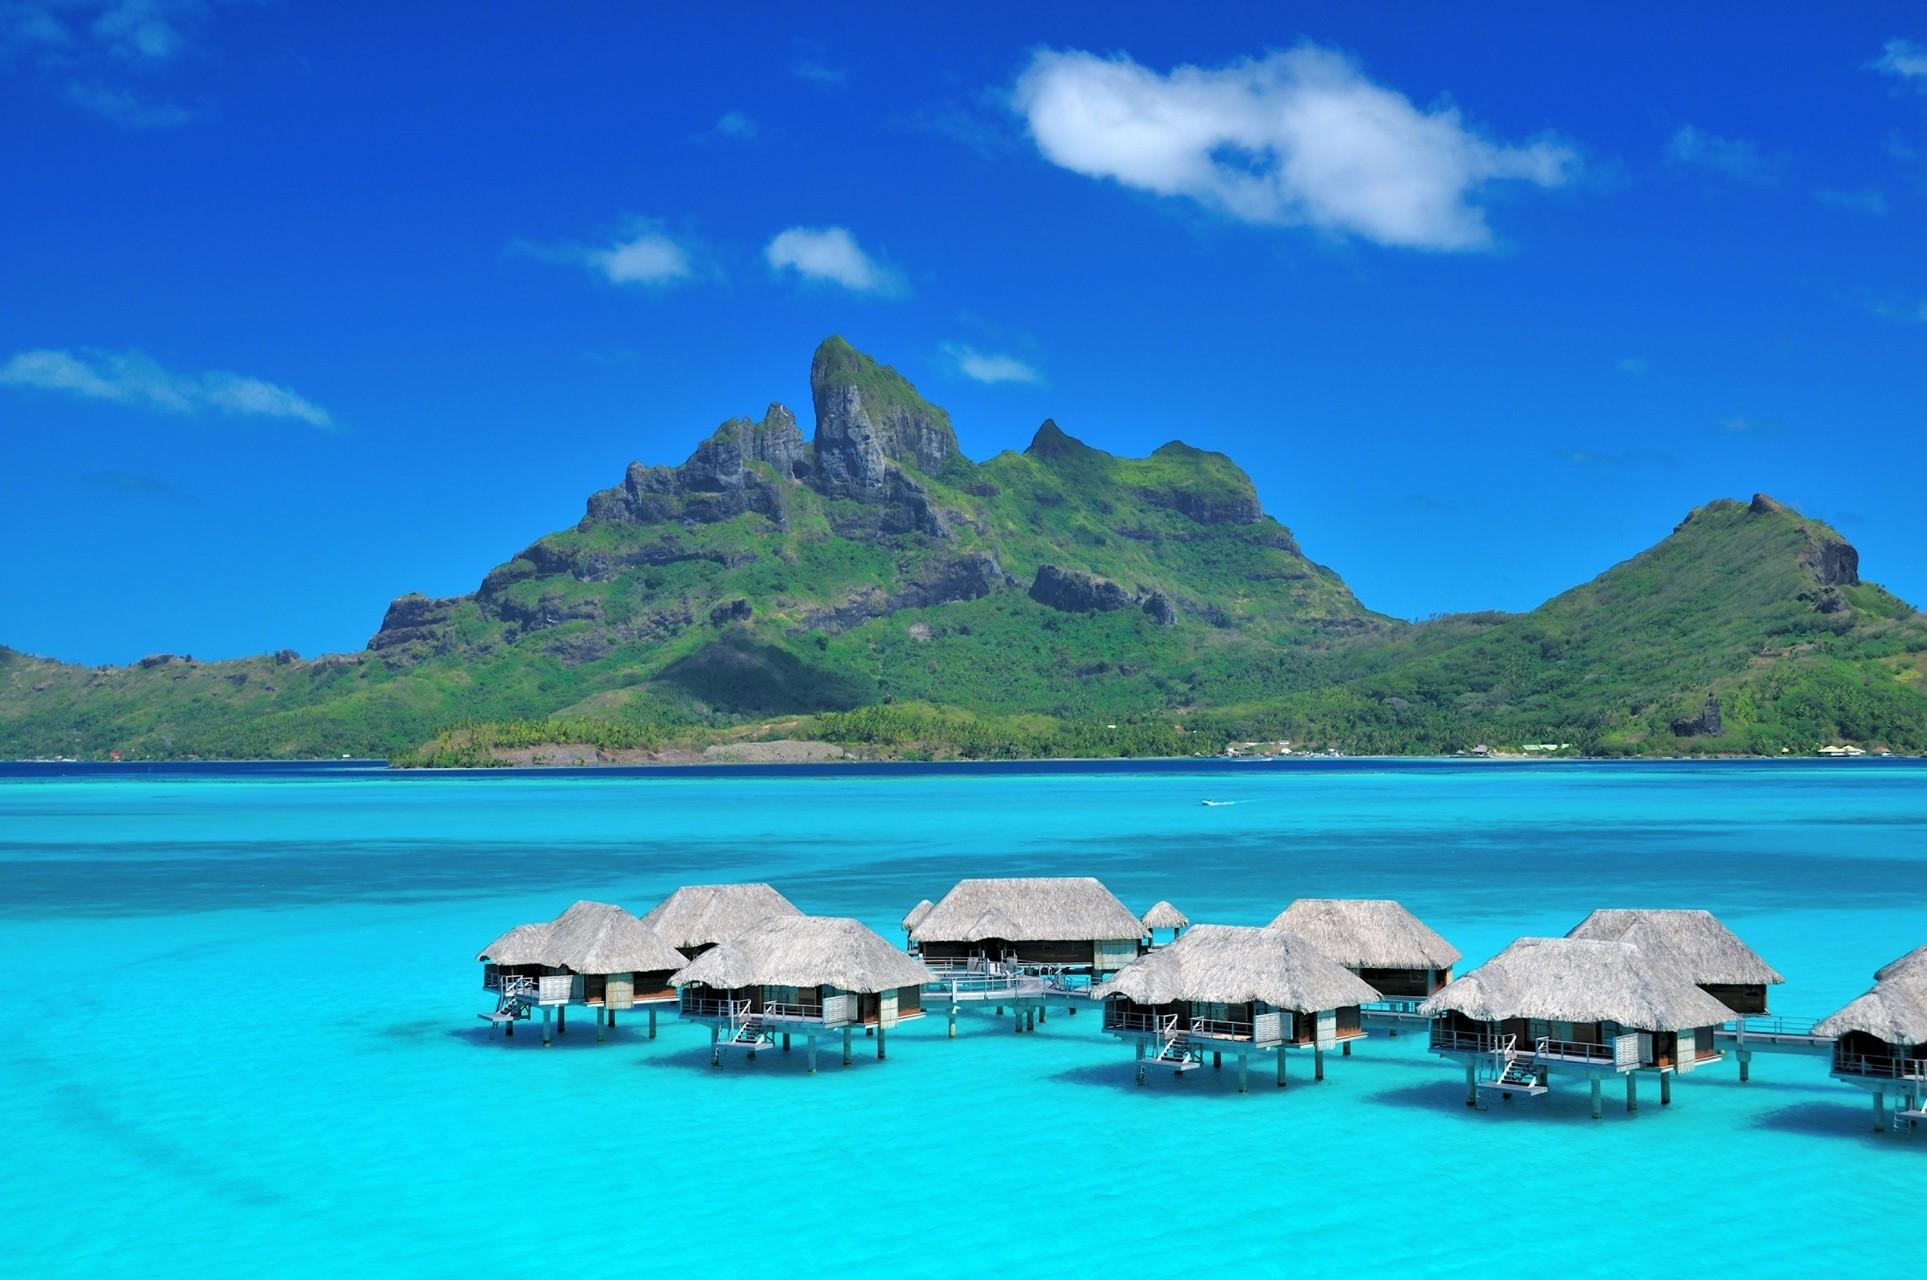 Landscapes nature french polynesia wallpaper